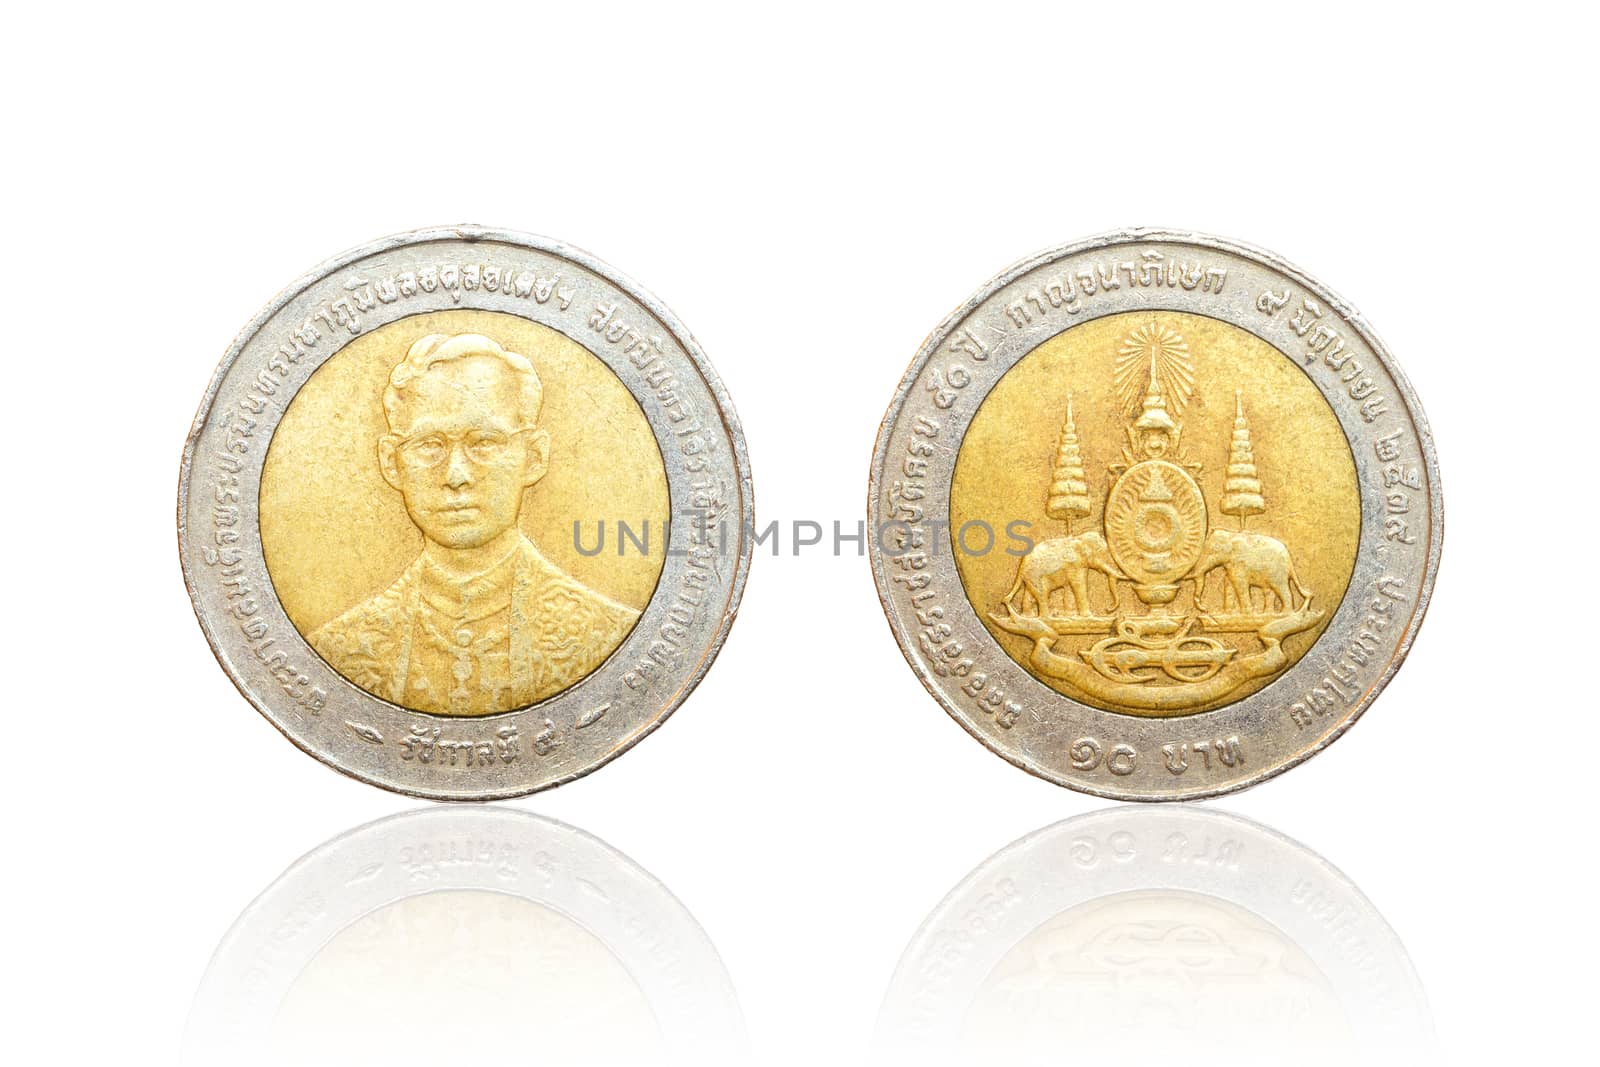 Thai coin 10 baht and reflect. by stigmatize